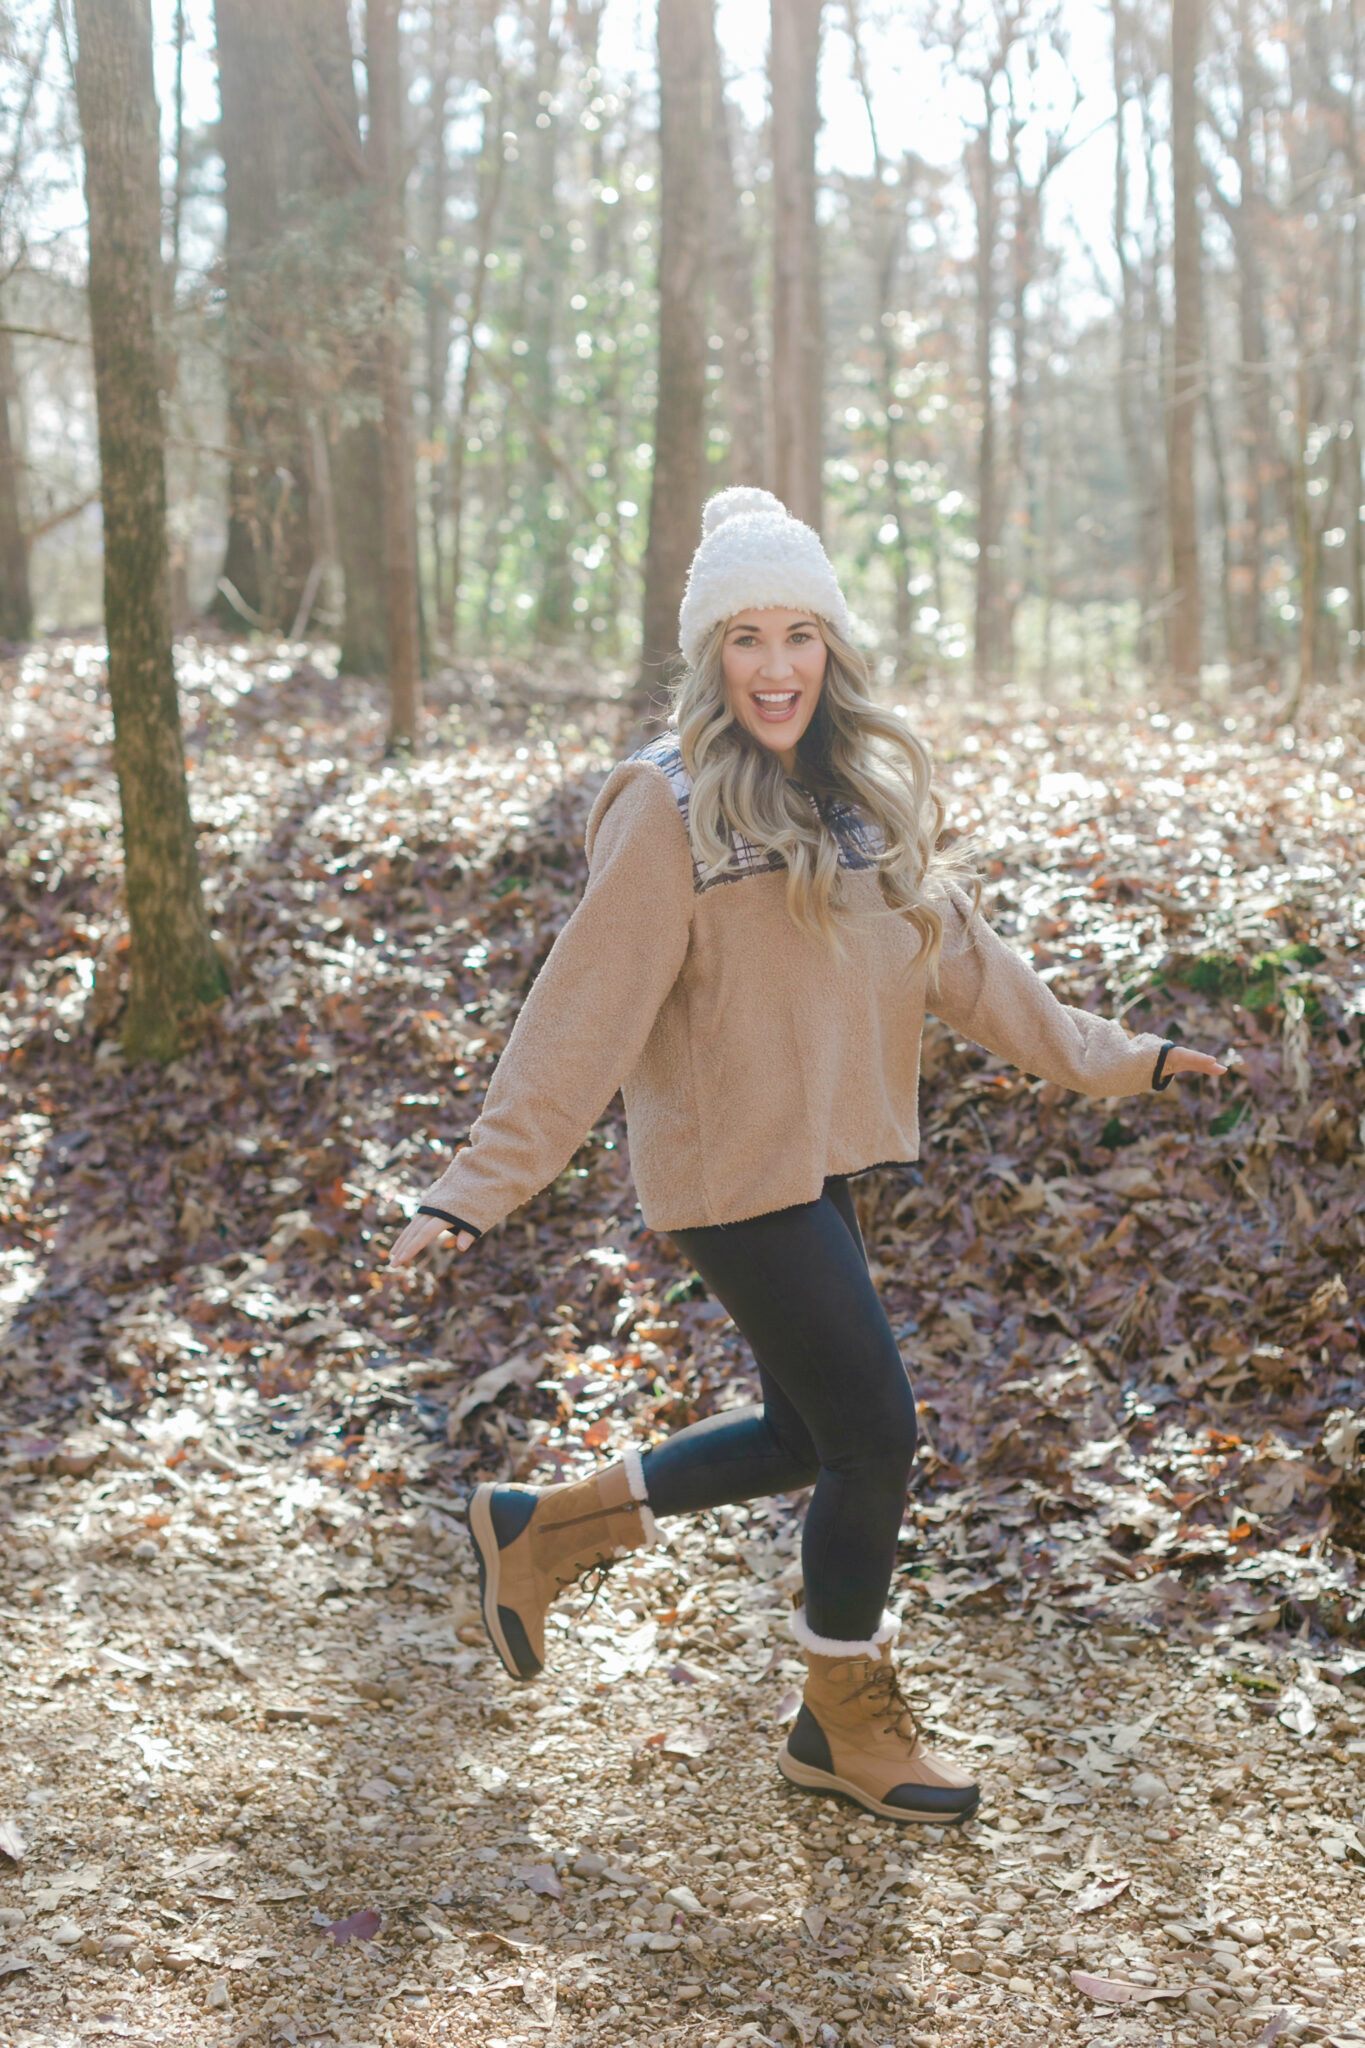 Sherpa pullover look styled by top Memphis fashion blogger, Walking in Memphis in High Heels.